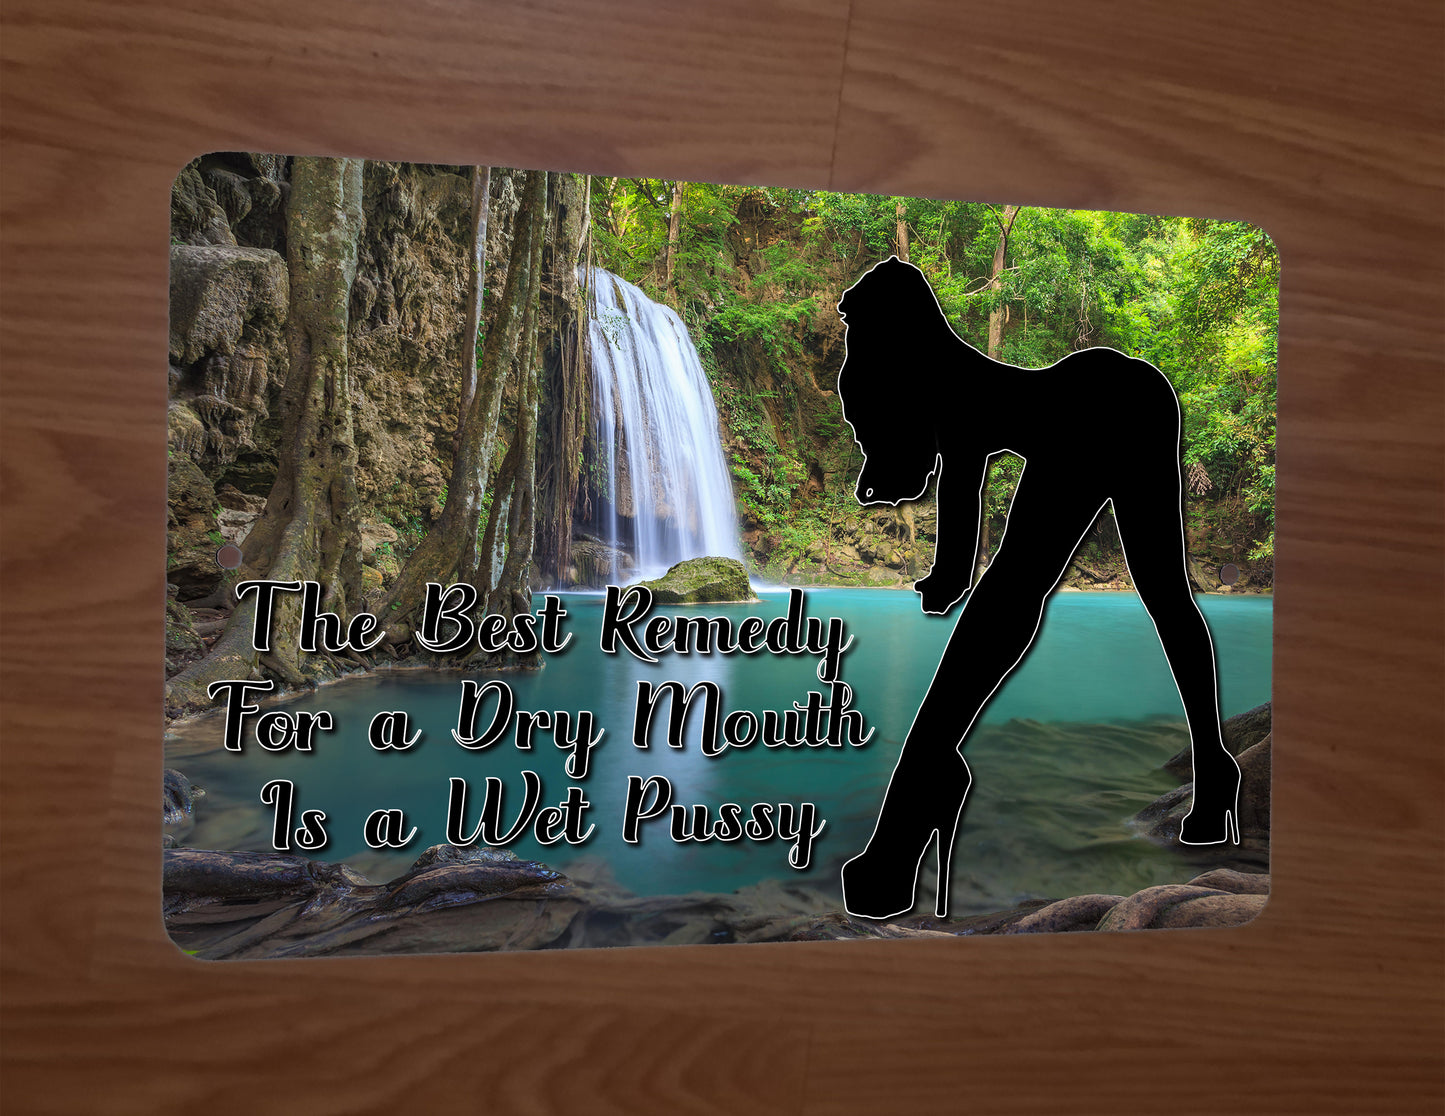 The Best Remedy for a Dry Mouth is a Wet Pussy Funny 8x12 Metal Wall Sign Misc Poster